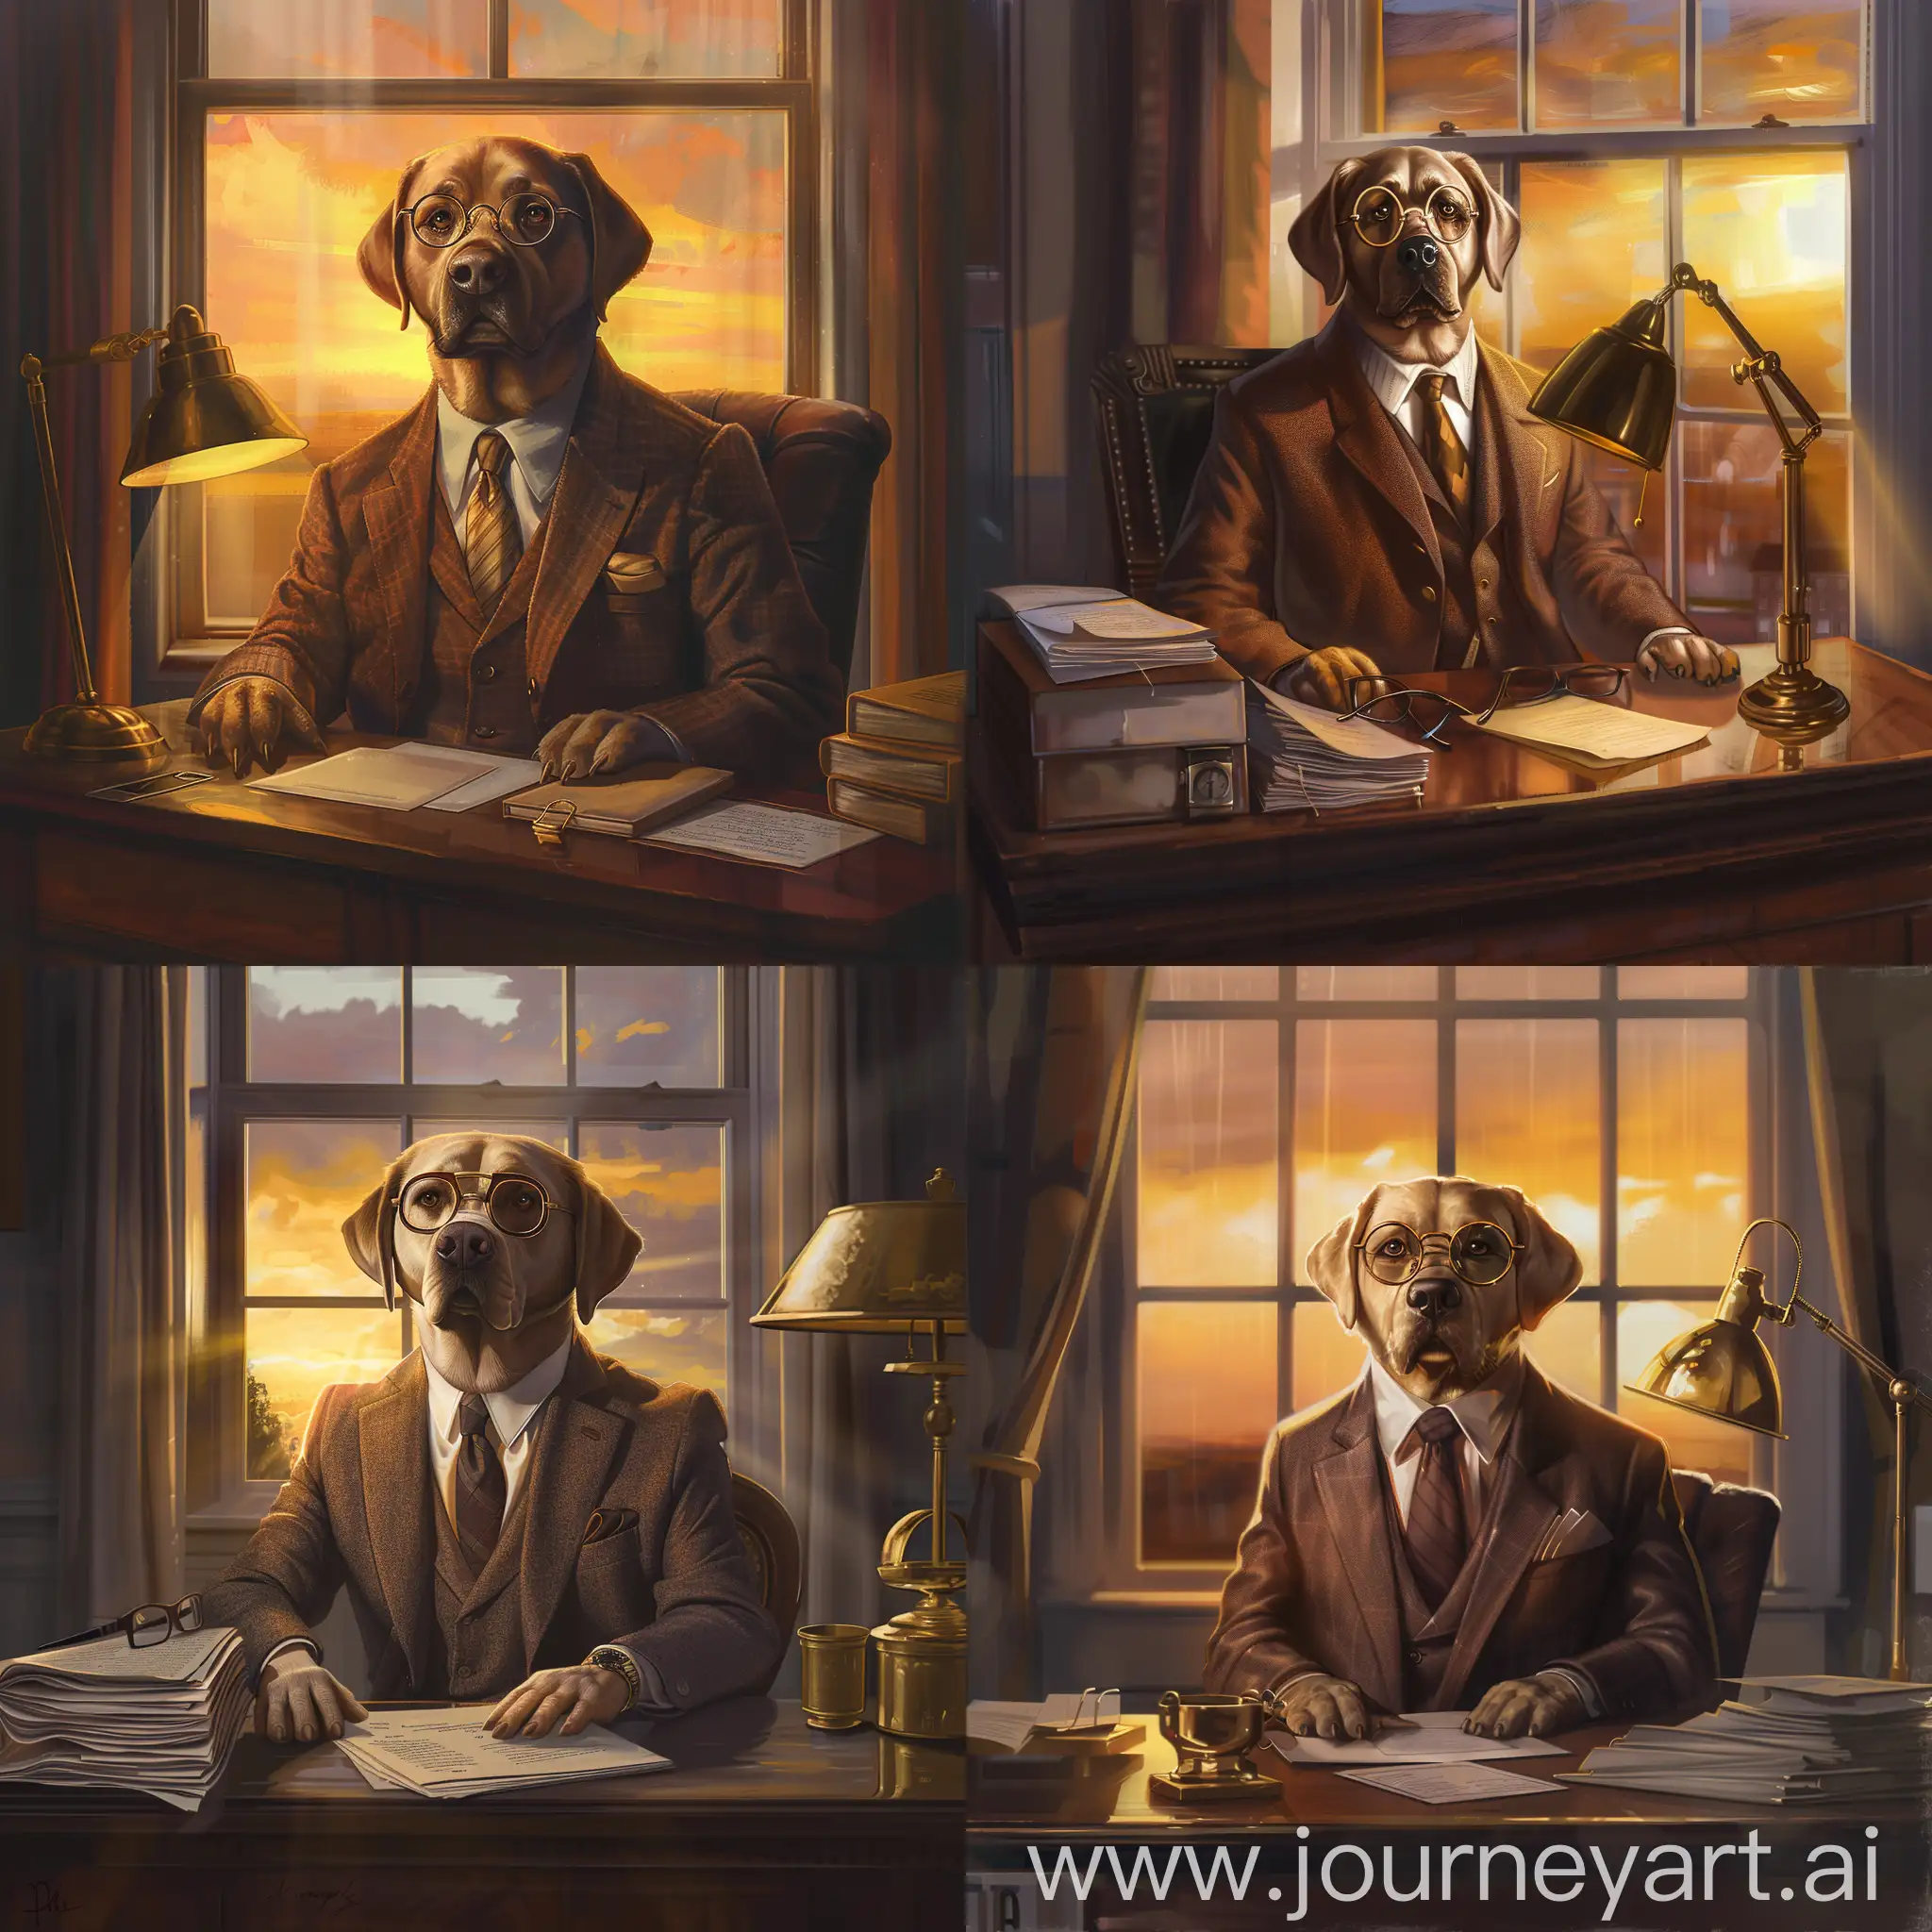 Sleek-Labrador-Executive-in-Tailored-Suit-at-Mahogany-Desk